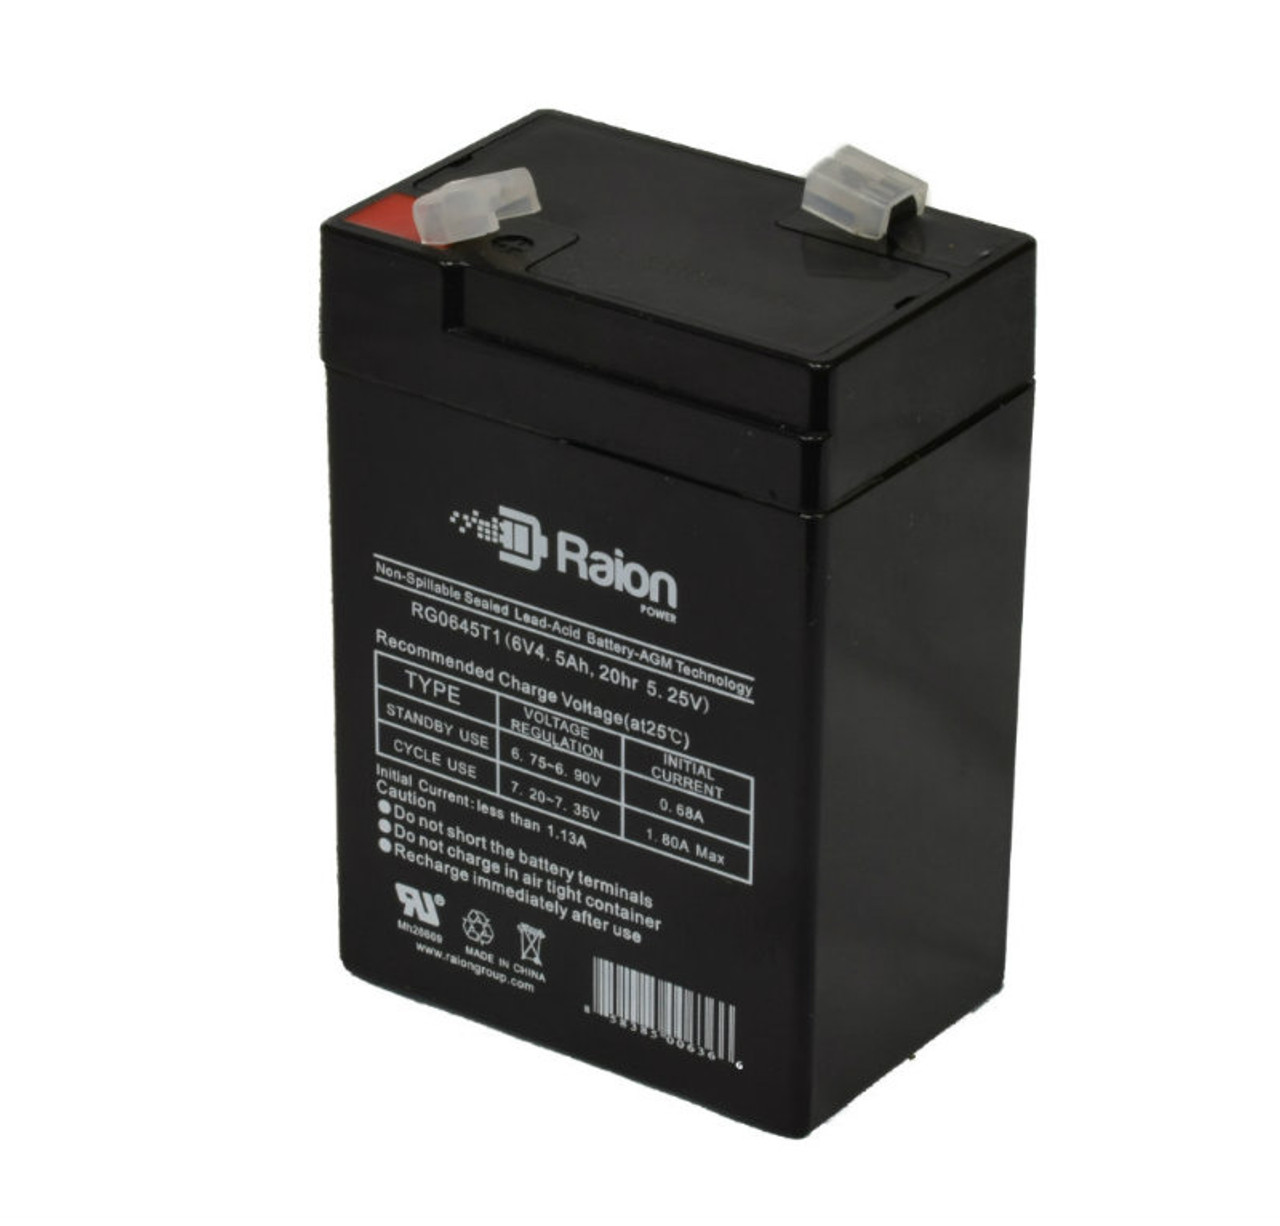 Raion Power RG0645T1 6V 4.5Ah Replacement Battery Cartridge for Tianchang TC6-4